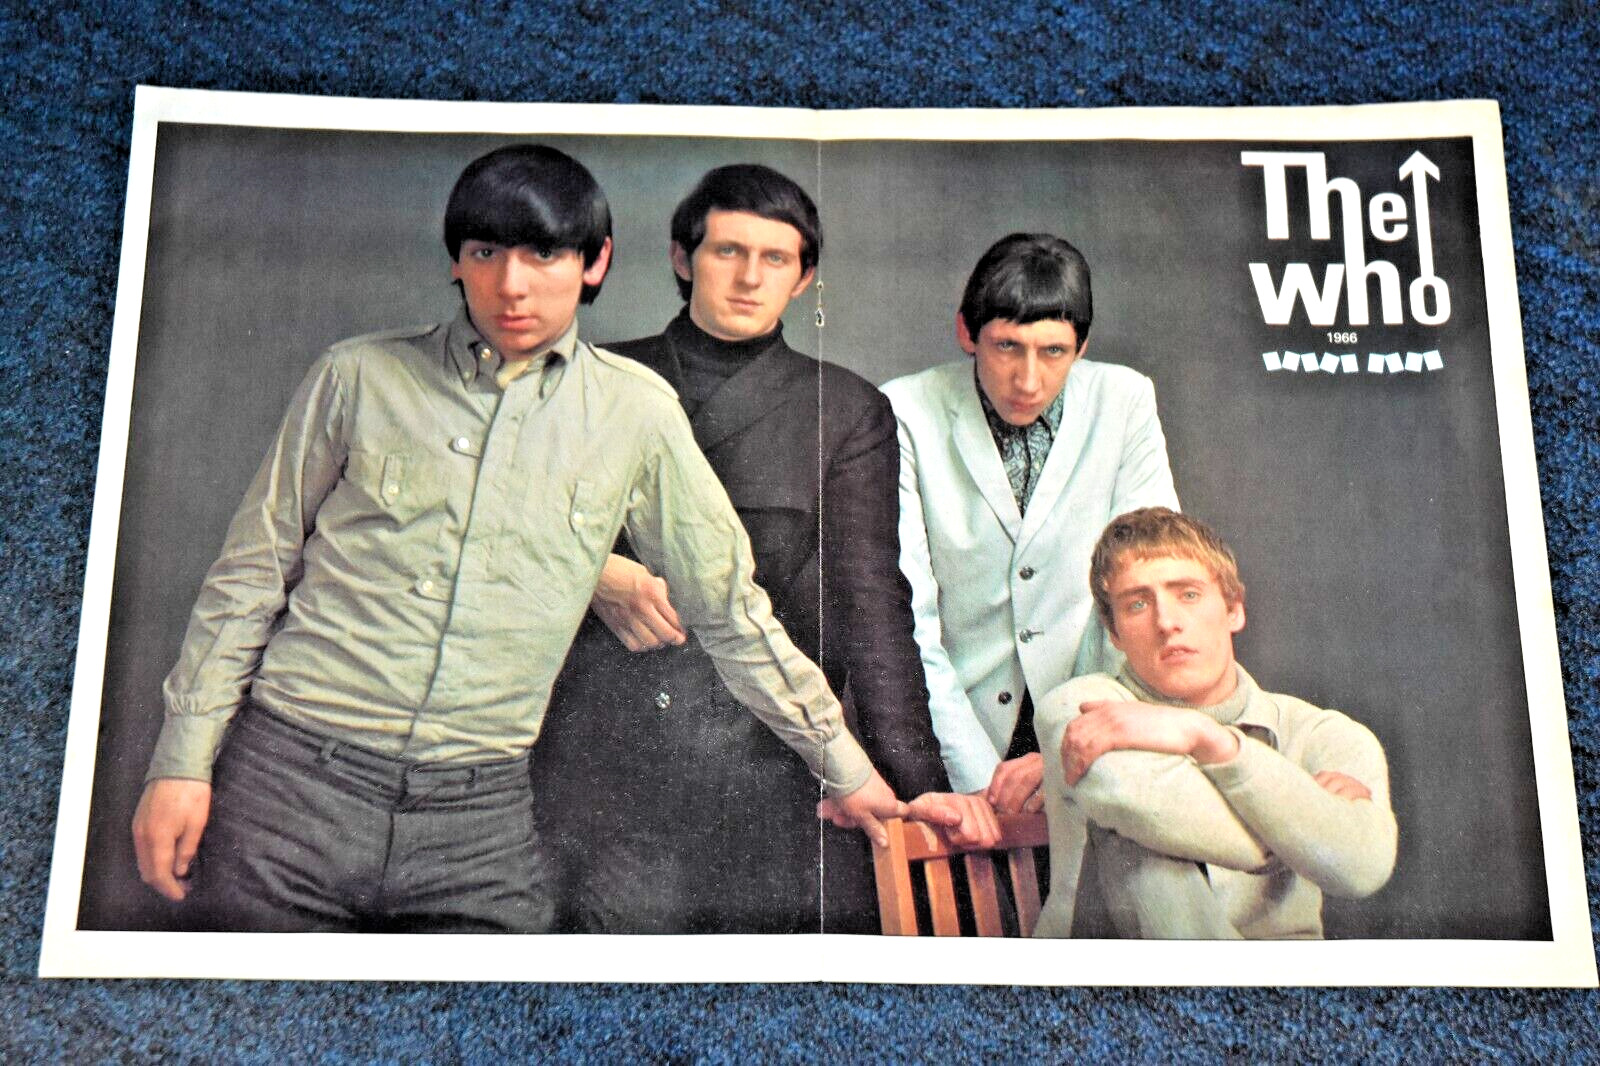 THE WHO band large A3 glossy ORIGINAL magazine promo vintage ART rock poster